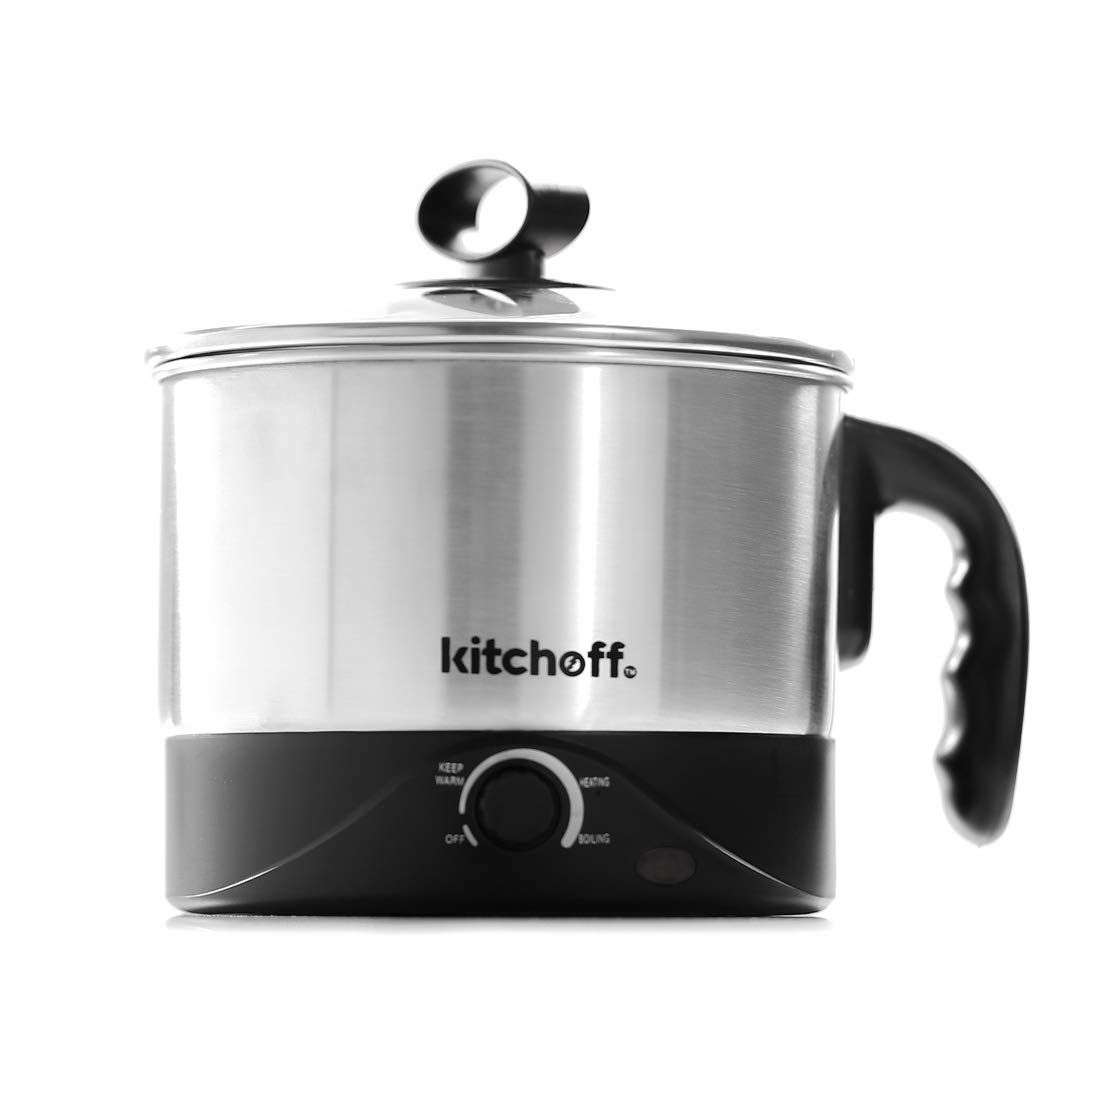 Kitchoff WDF Automatic Electric Multi-Purpose Kettle (Sliver and Black) (1.5 Liter)